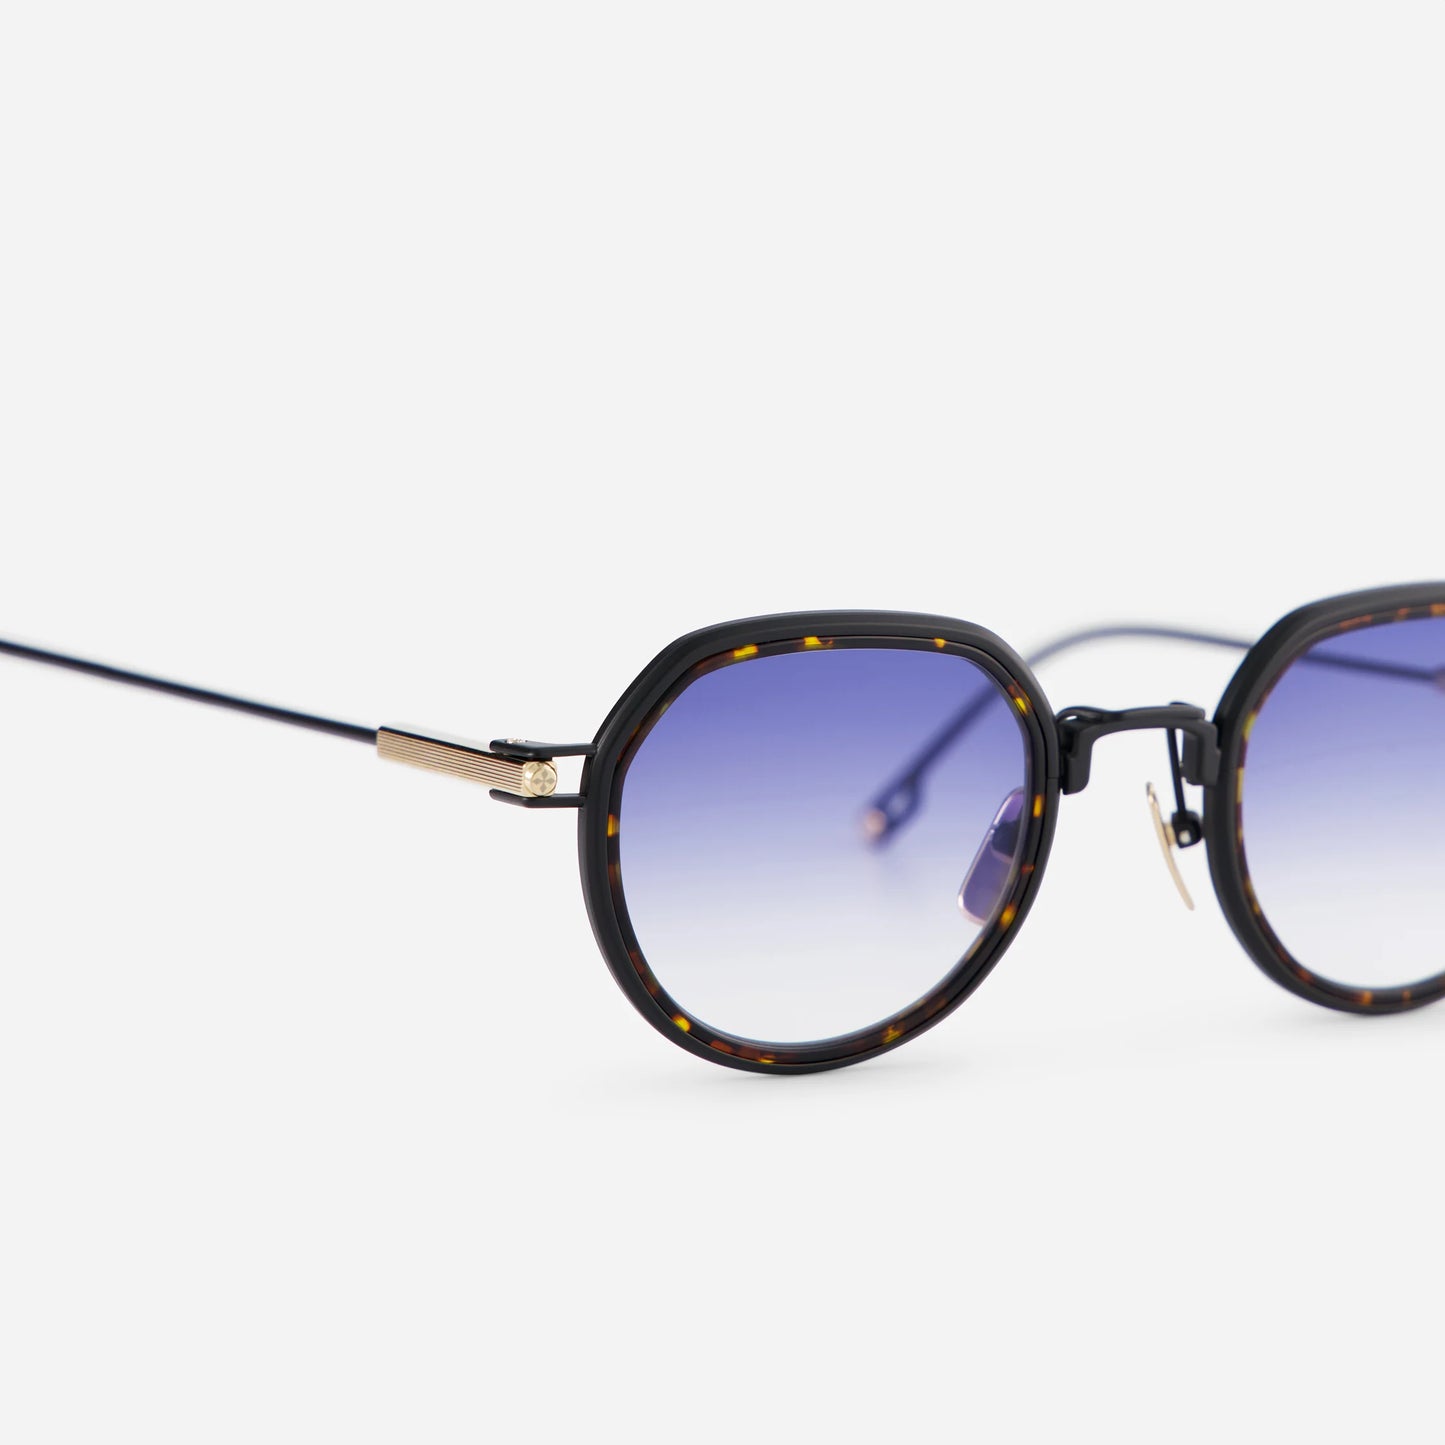 Experience the perfect blend of style and sophistication with Belel-T S2206 sunglasses, showcasing blue gradient lenses and a timeless tortoise insert.